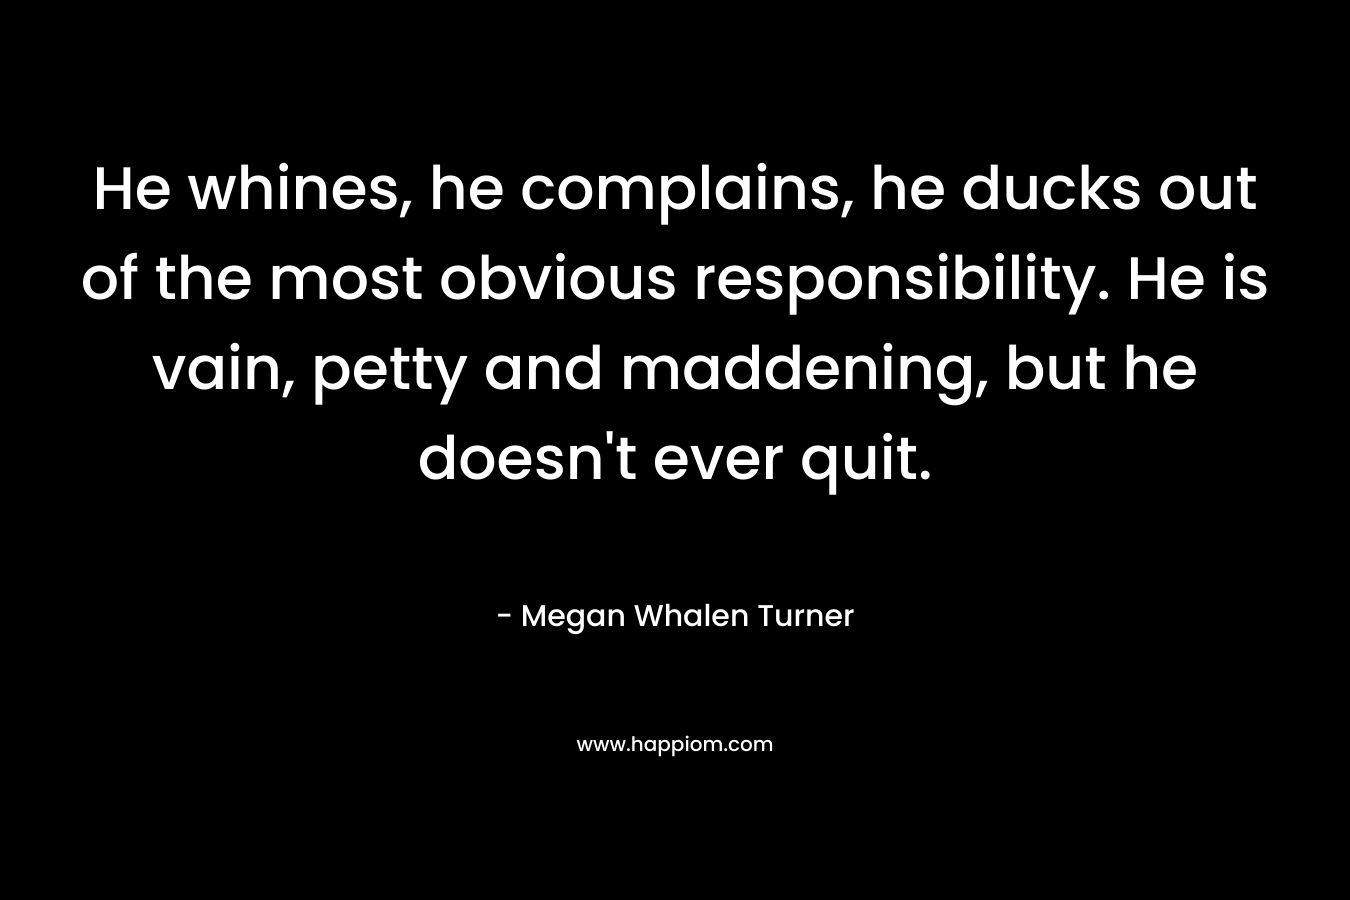 He whines, he complains, he ducks out of the most obvious responsibility. He is vain, petty and maddening, but he doesn’t ever quit. – Megan Whalen Turner